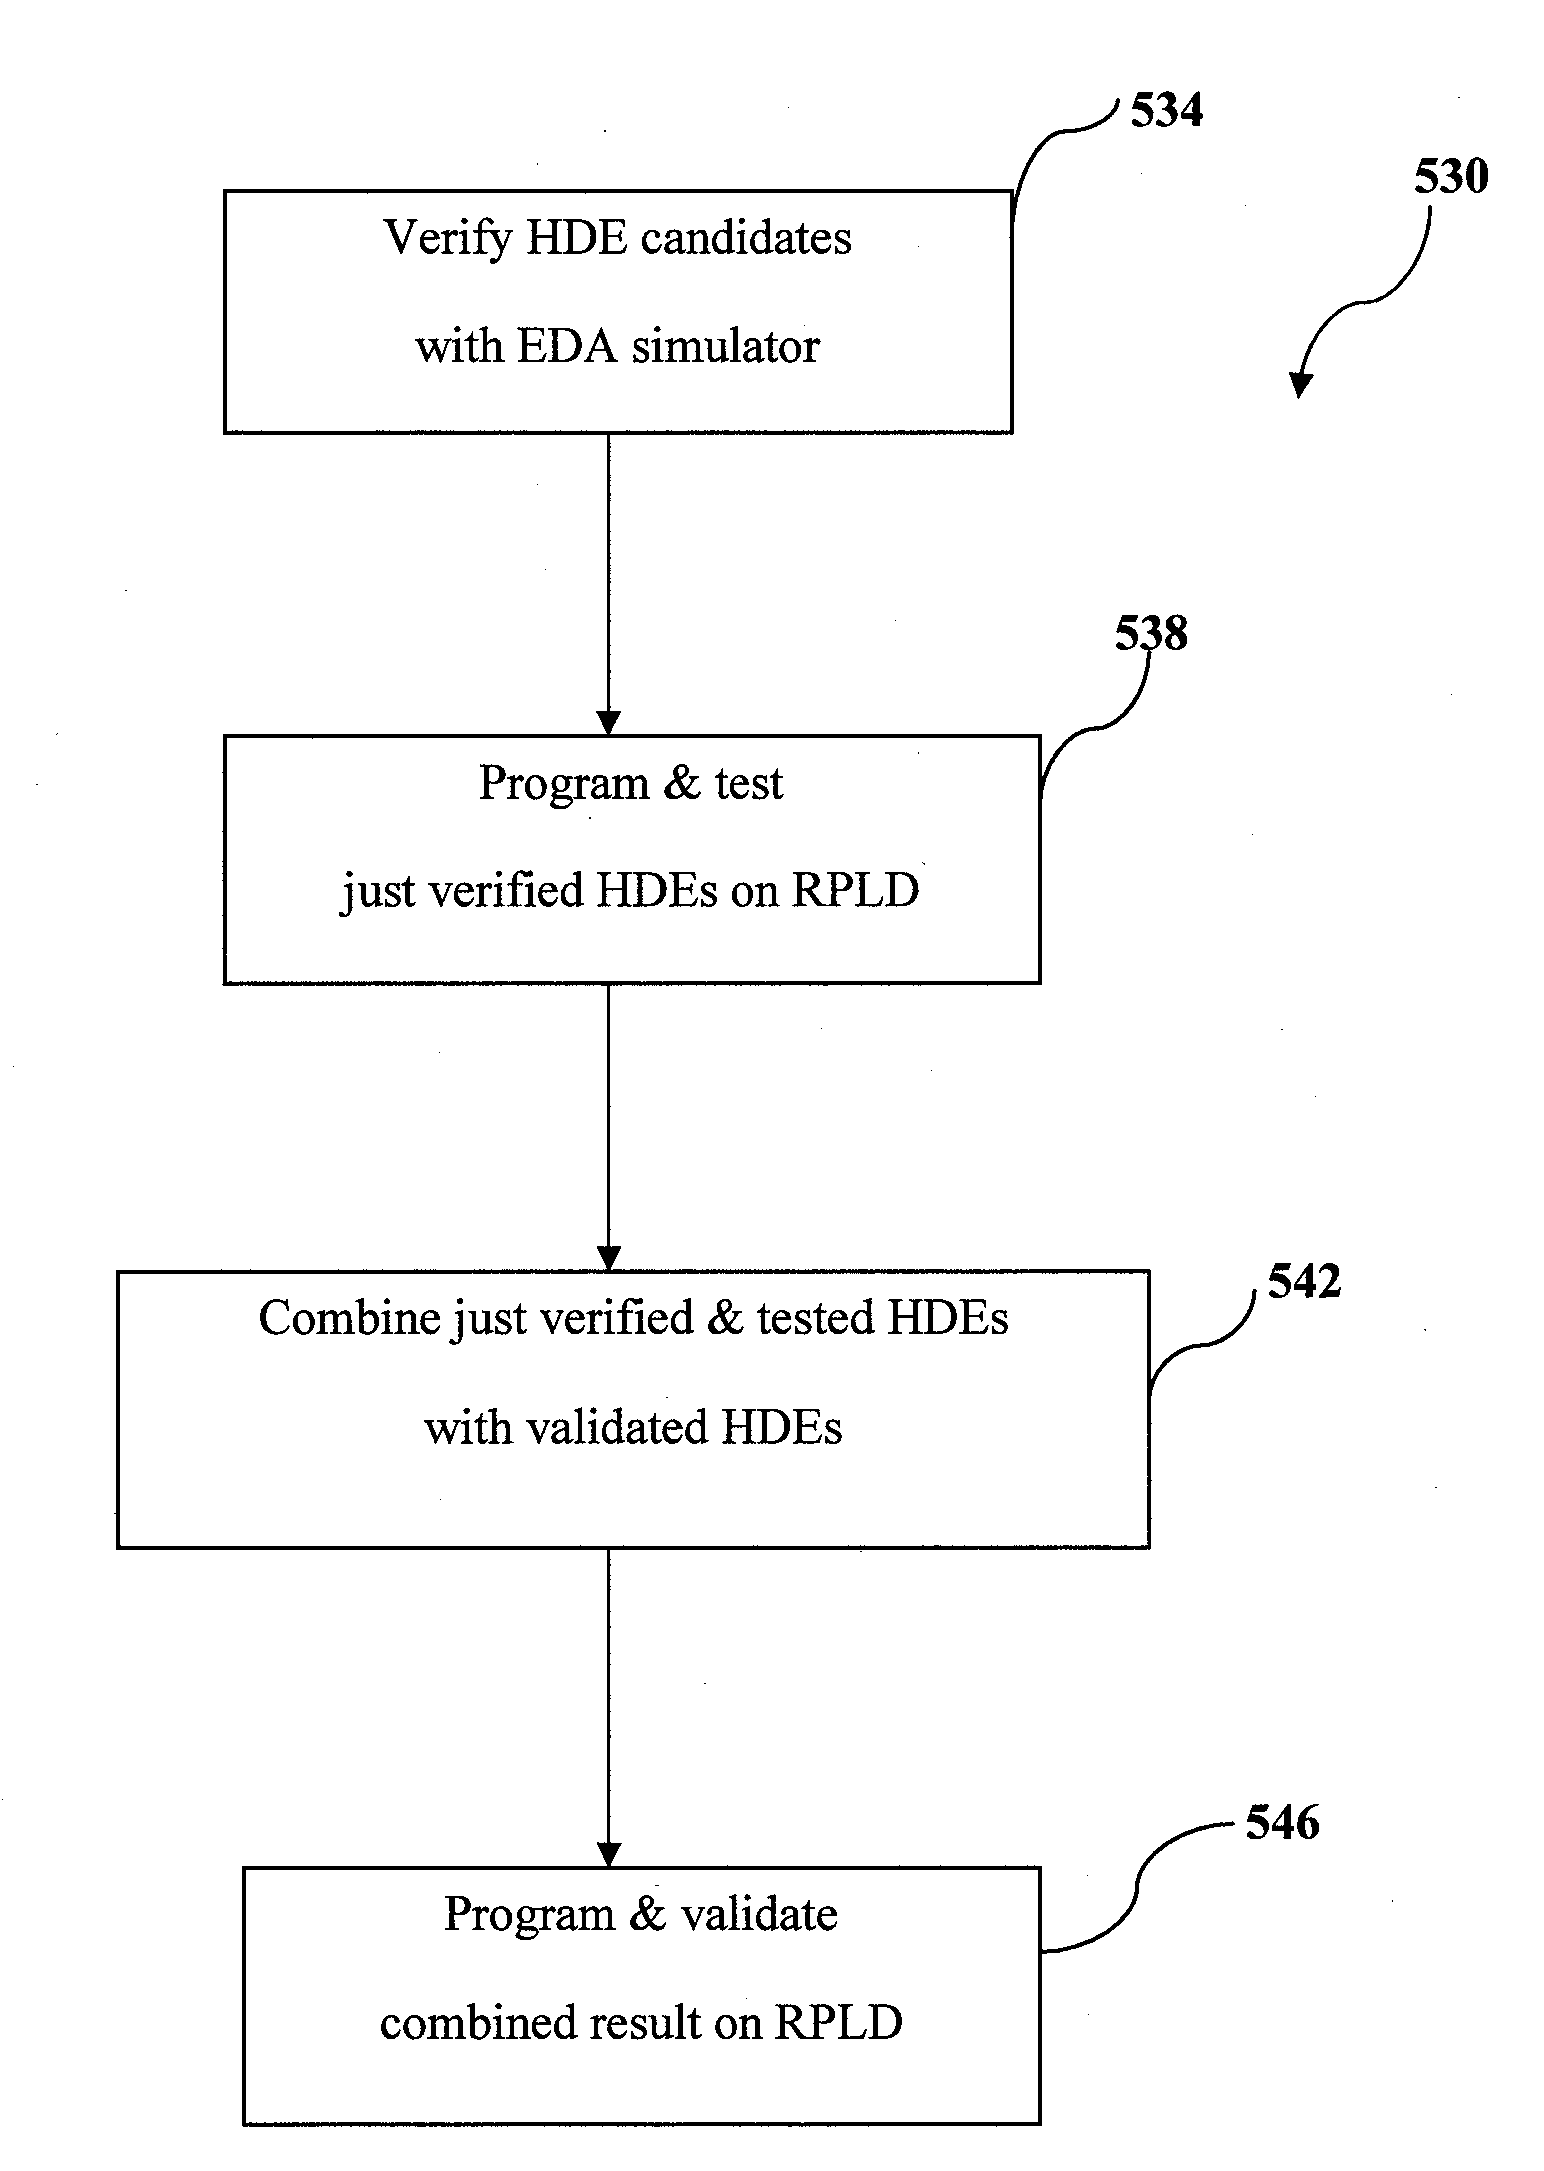 Integrated prototyping system for validating an electronic system design